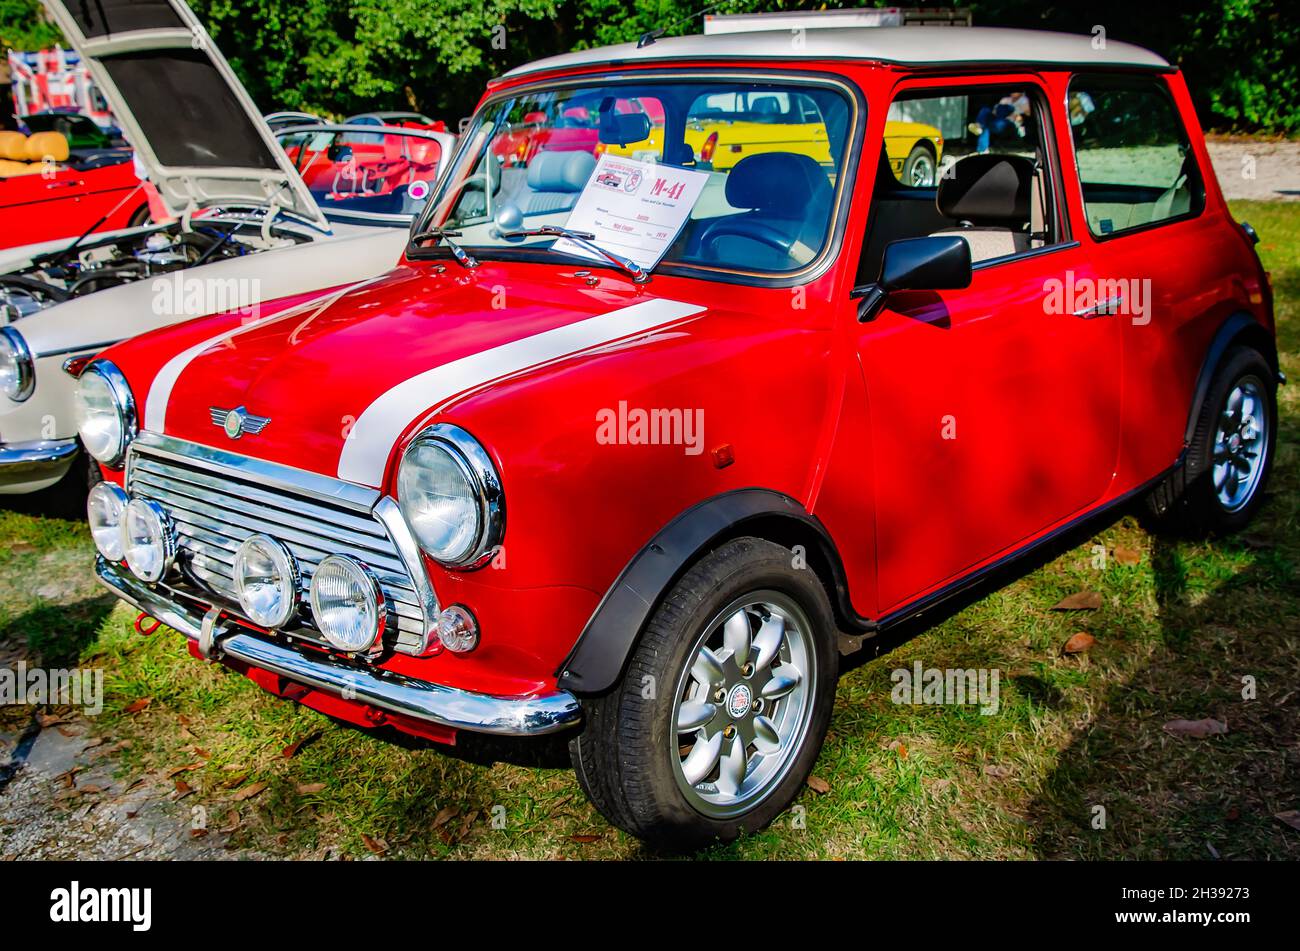 A 1979 Austin Mini Cooper is displayed at the 31st annual British Car Festival, Oct. 24, 2021, in Fairhope, Alabama. Stock Photo